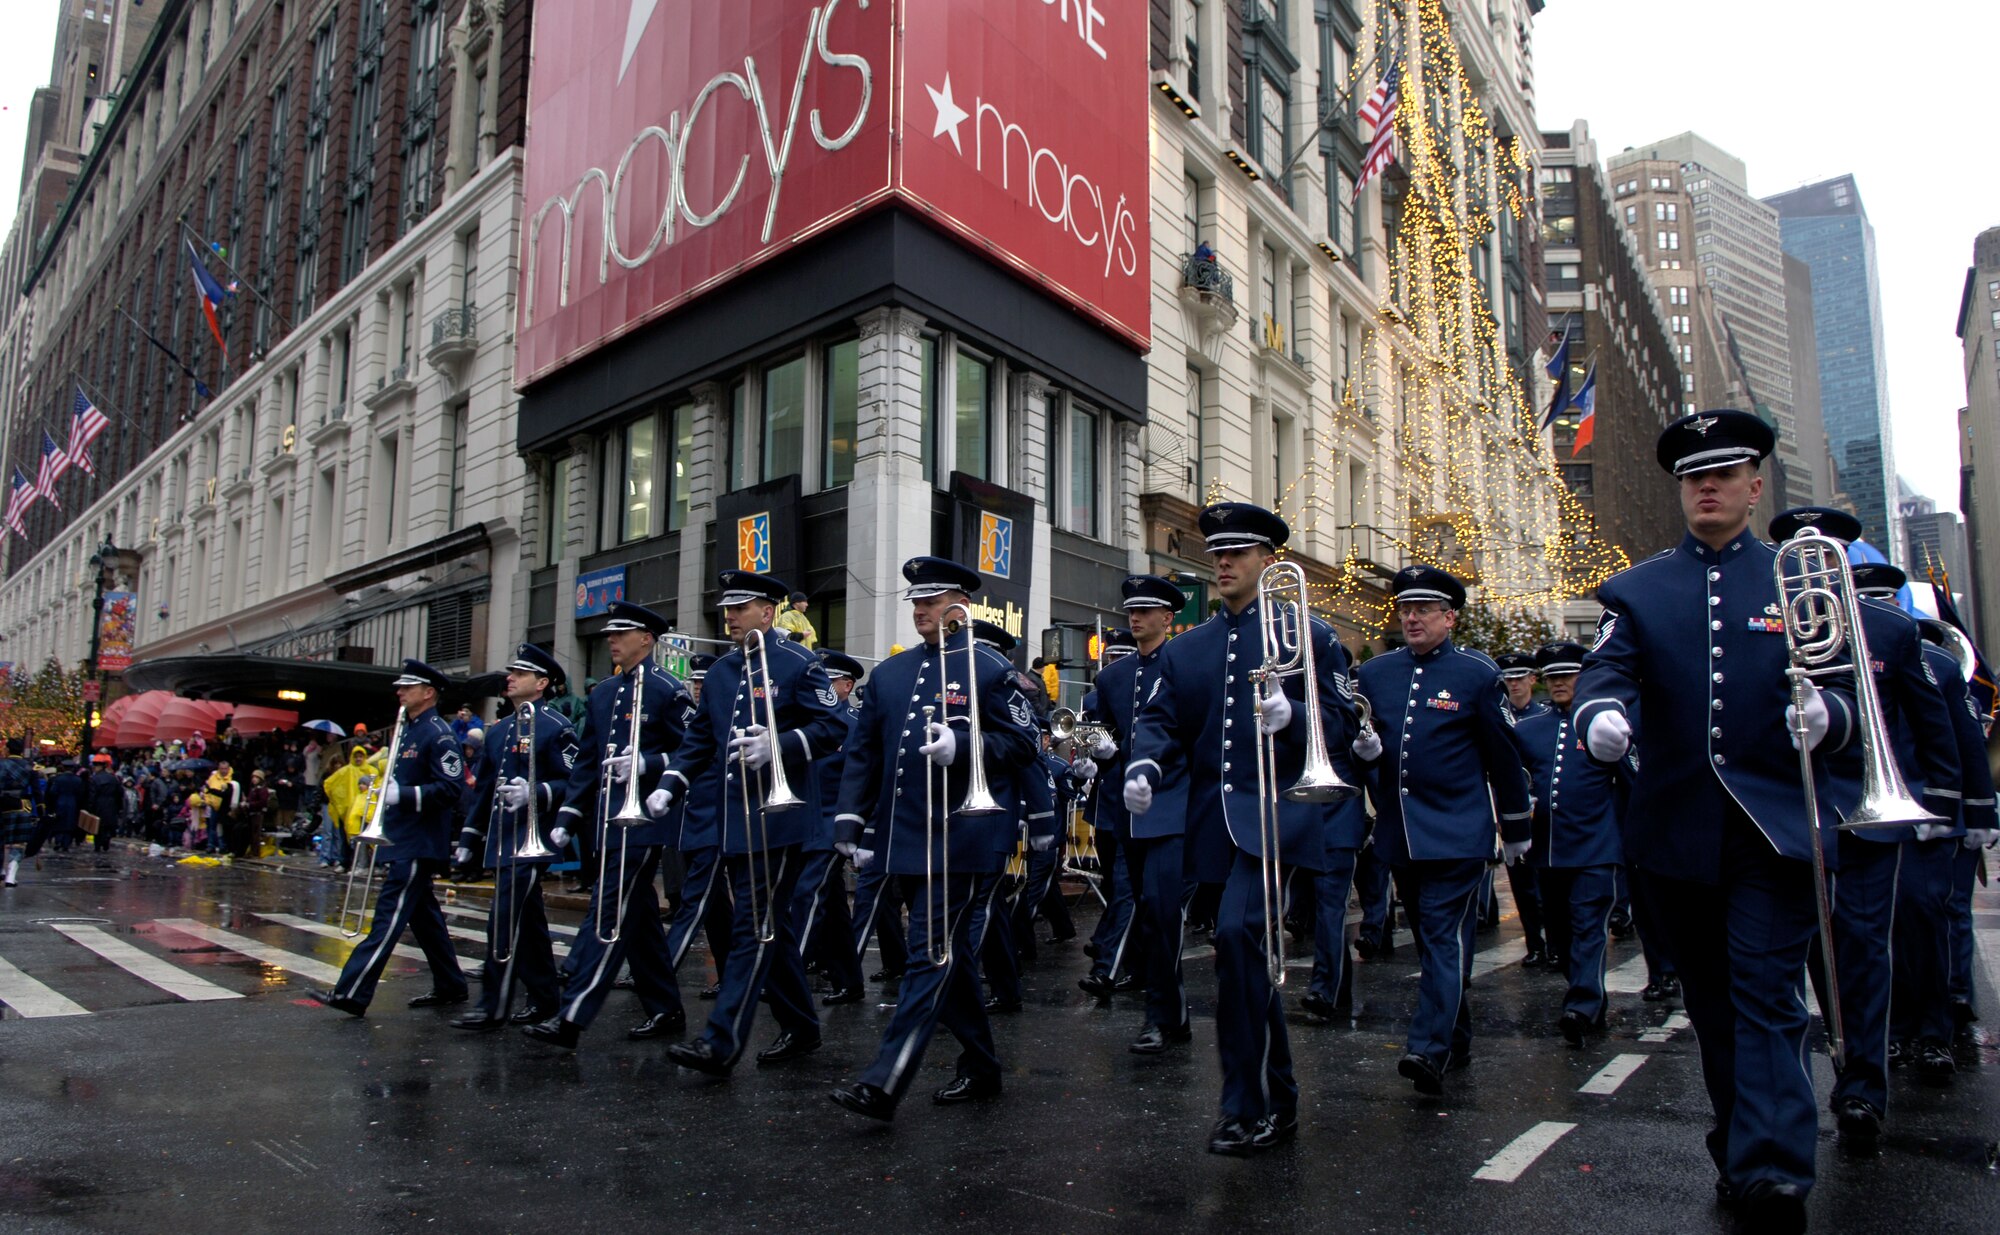 The U.S. Air Force Academy Marching Band rounds the corner of Broadway and 34th Street at the 80th Macy's Thanksgiving Day Parade in New York City, N.Y., Nov. 23.
(U.S. Air Force photo/Senior Airman Brian Ferguson)
